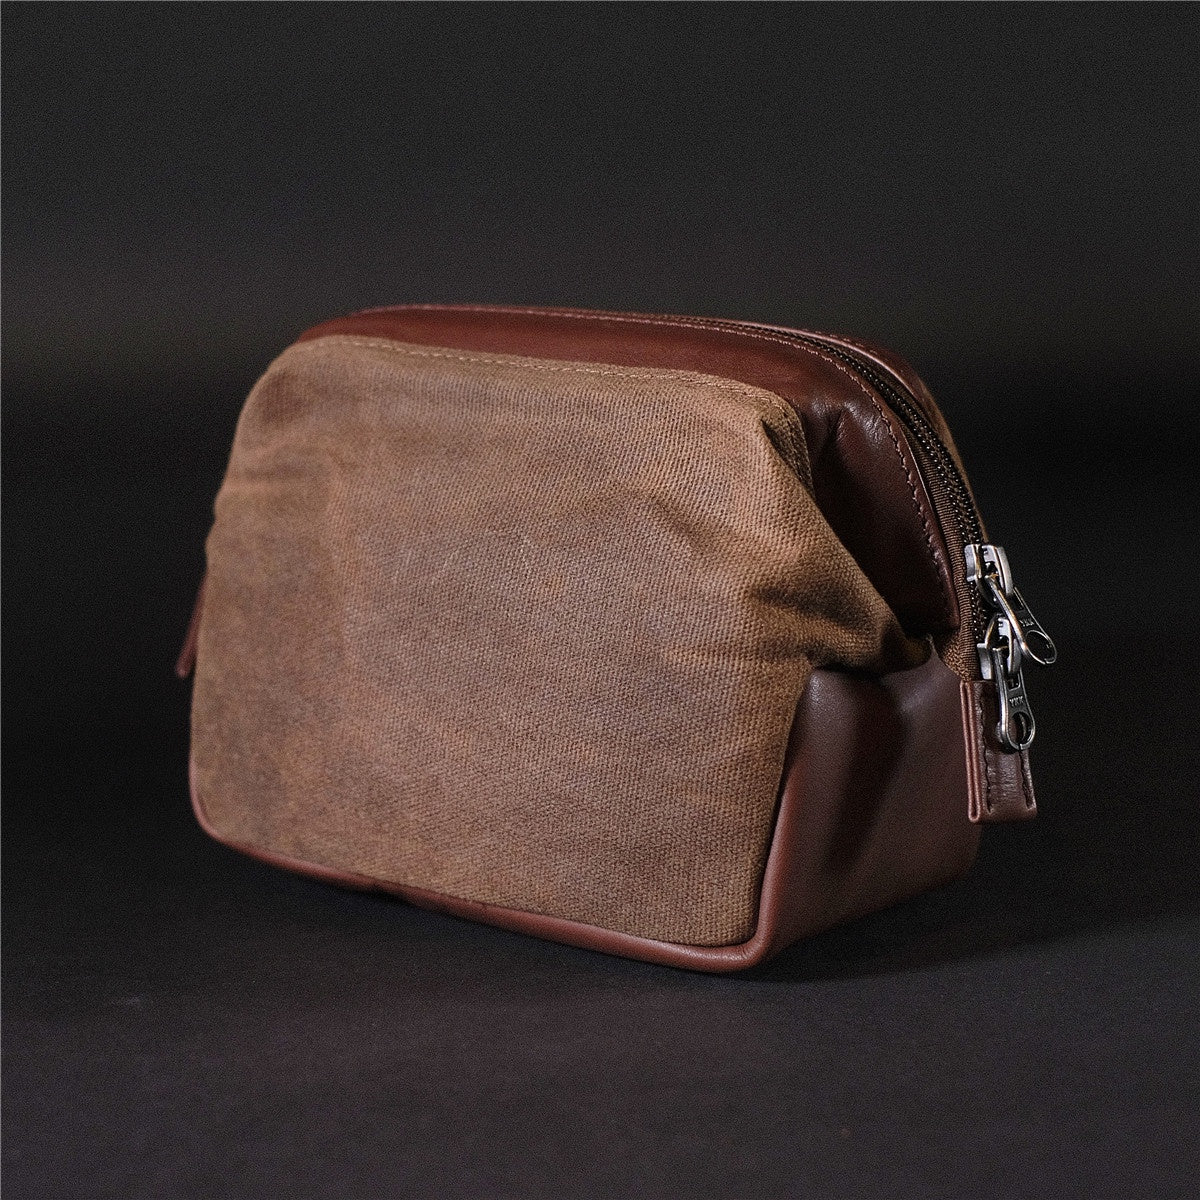 CAM-IN HALF CANVAS LEATHER ZIP POUCH